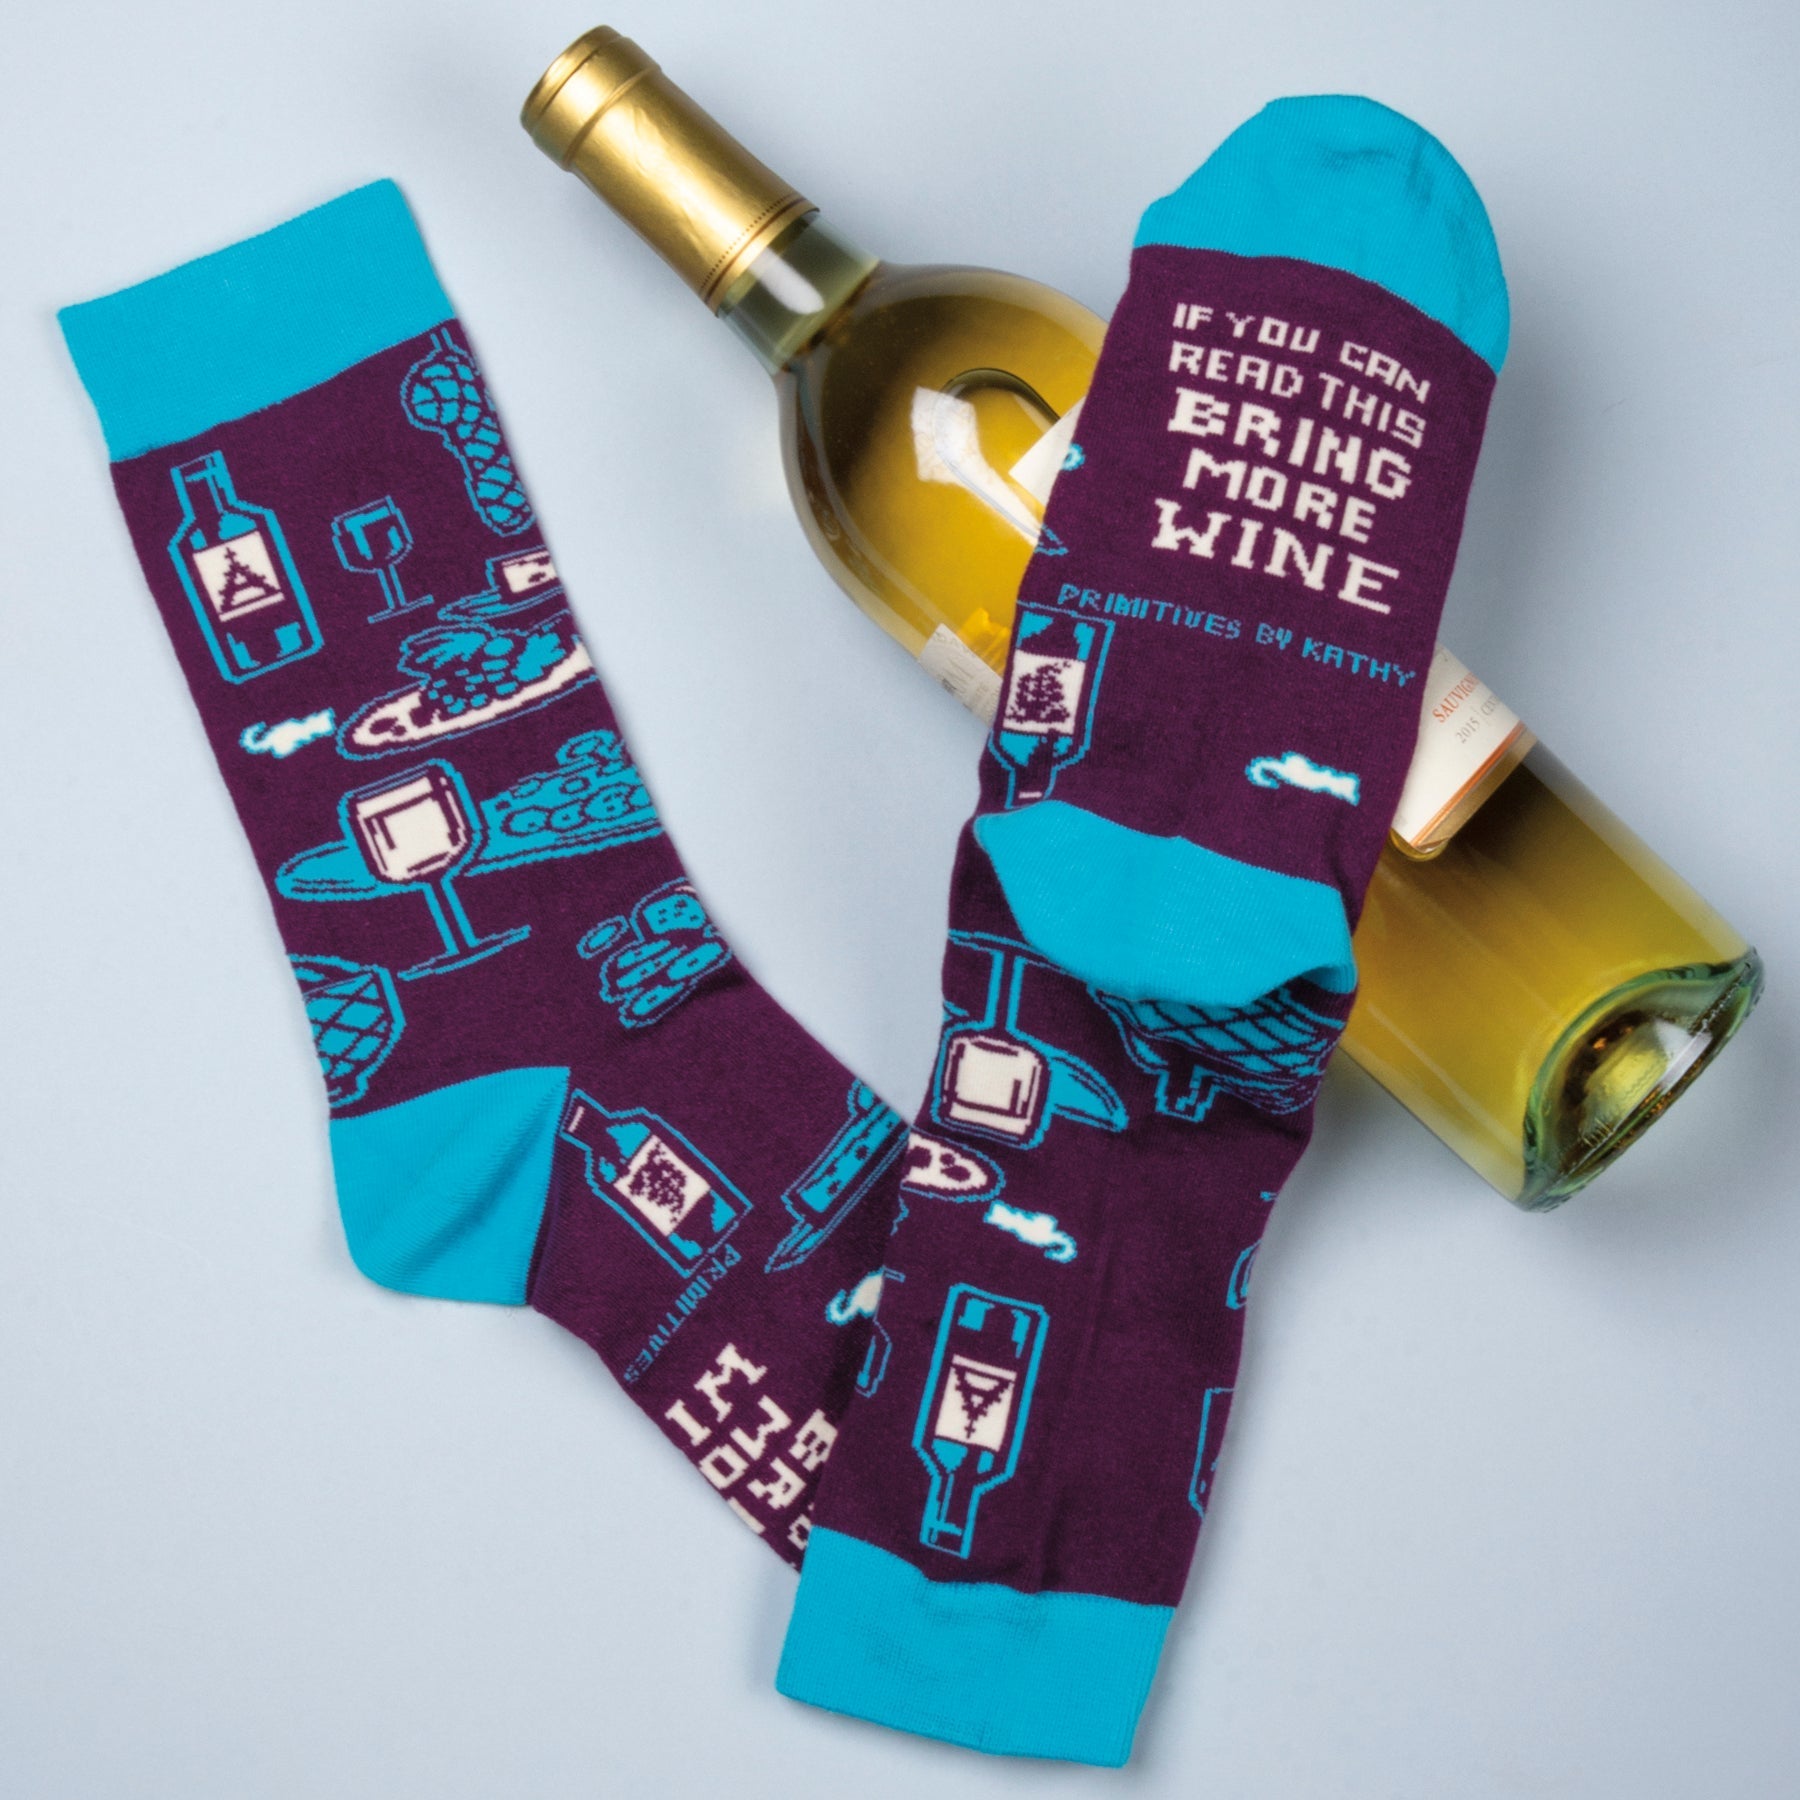 If You Can Read This Bring More Wine Unisex Socks